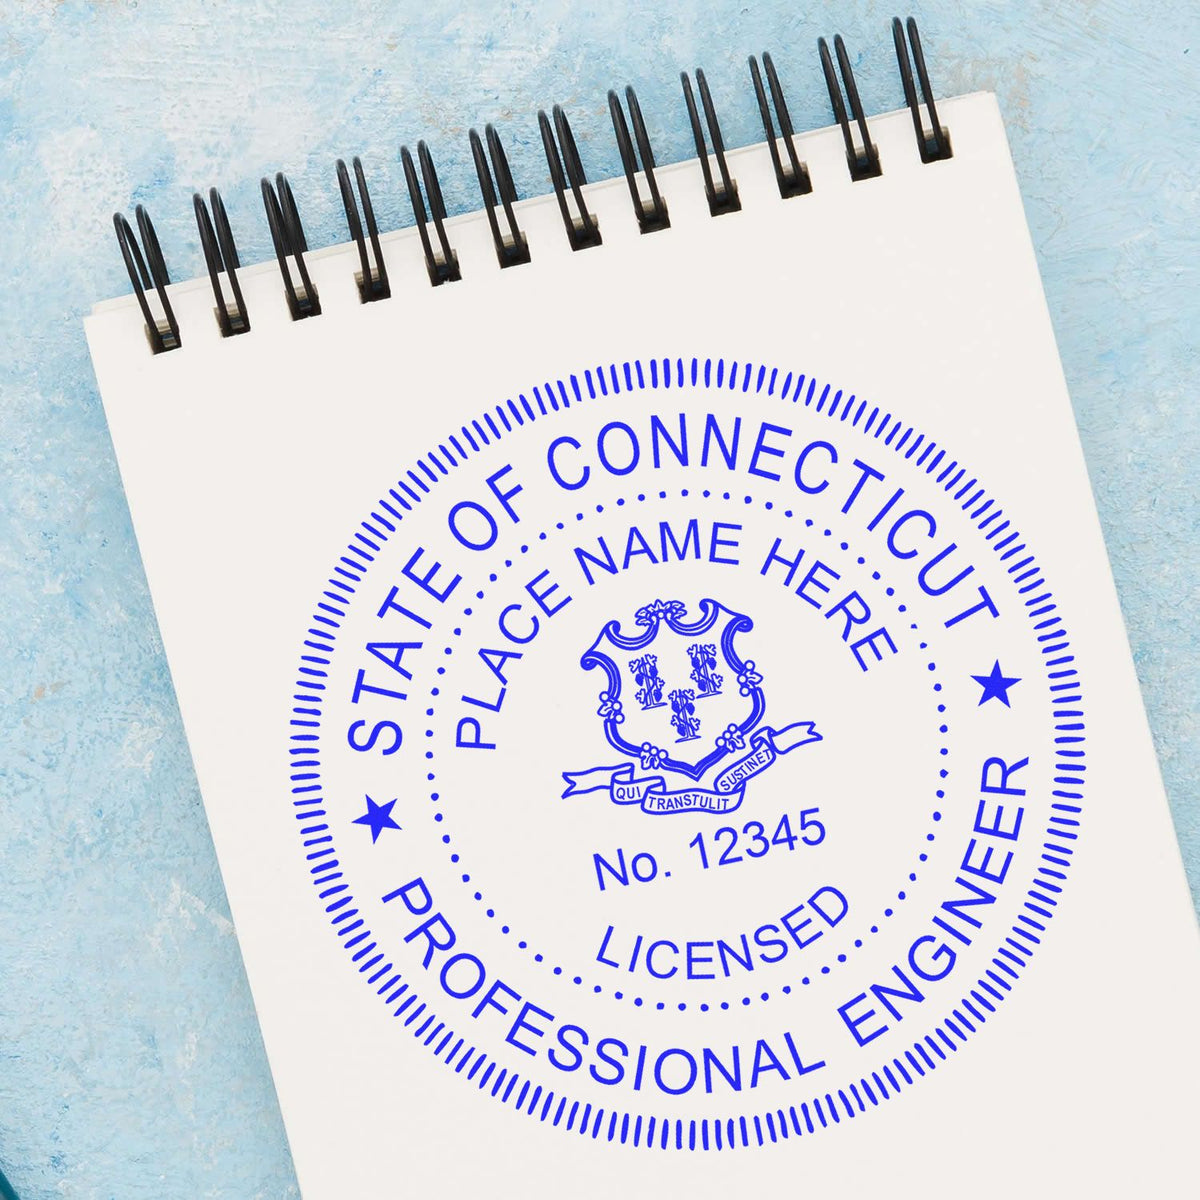 The Slim Pre-Inked Connecticut Professional Engineer Seal Stamp stamp impression comes to life with a crisp, detailed photo on paper - showcasing true professional quality.